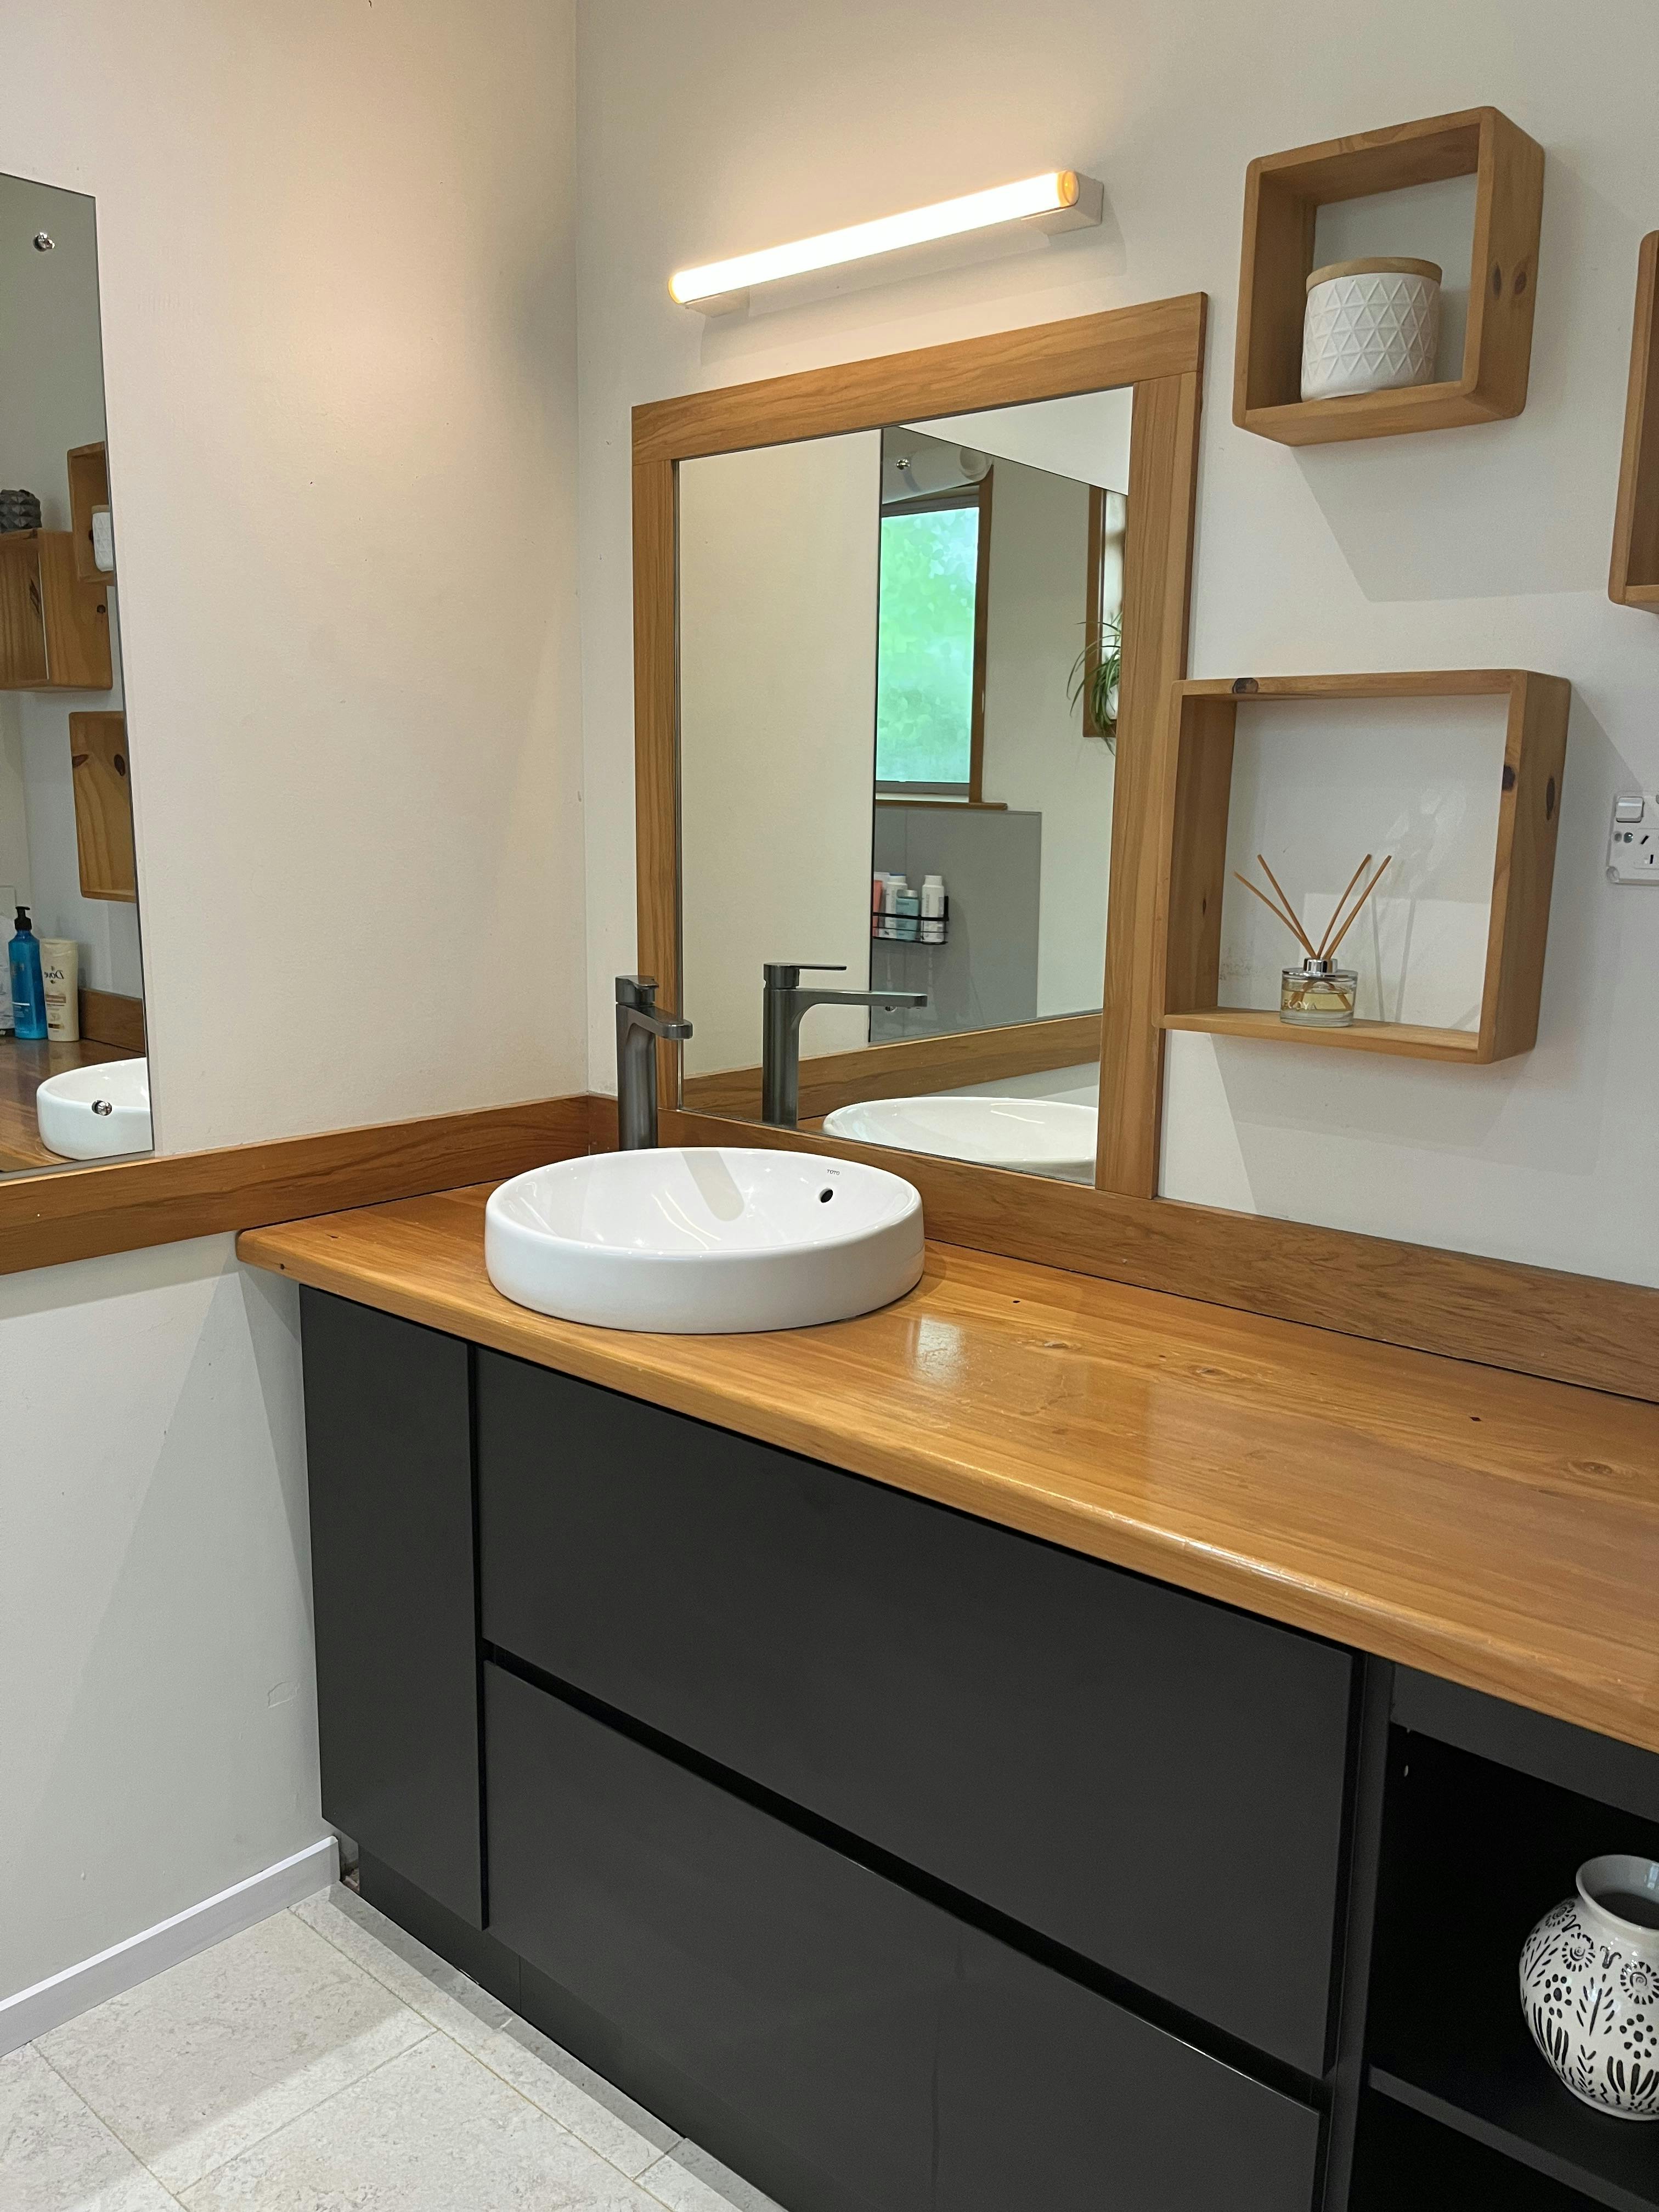 Whether you are looking for a bathroom with a more traditional or modern touch, we can help you select the best option for your home.